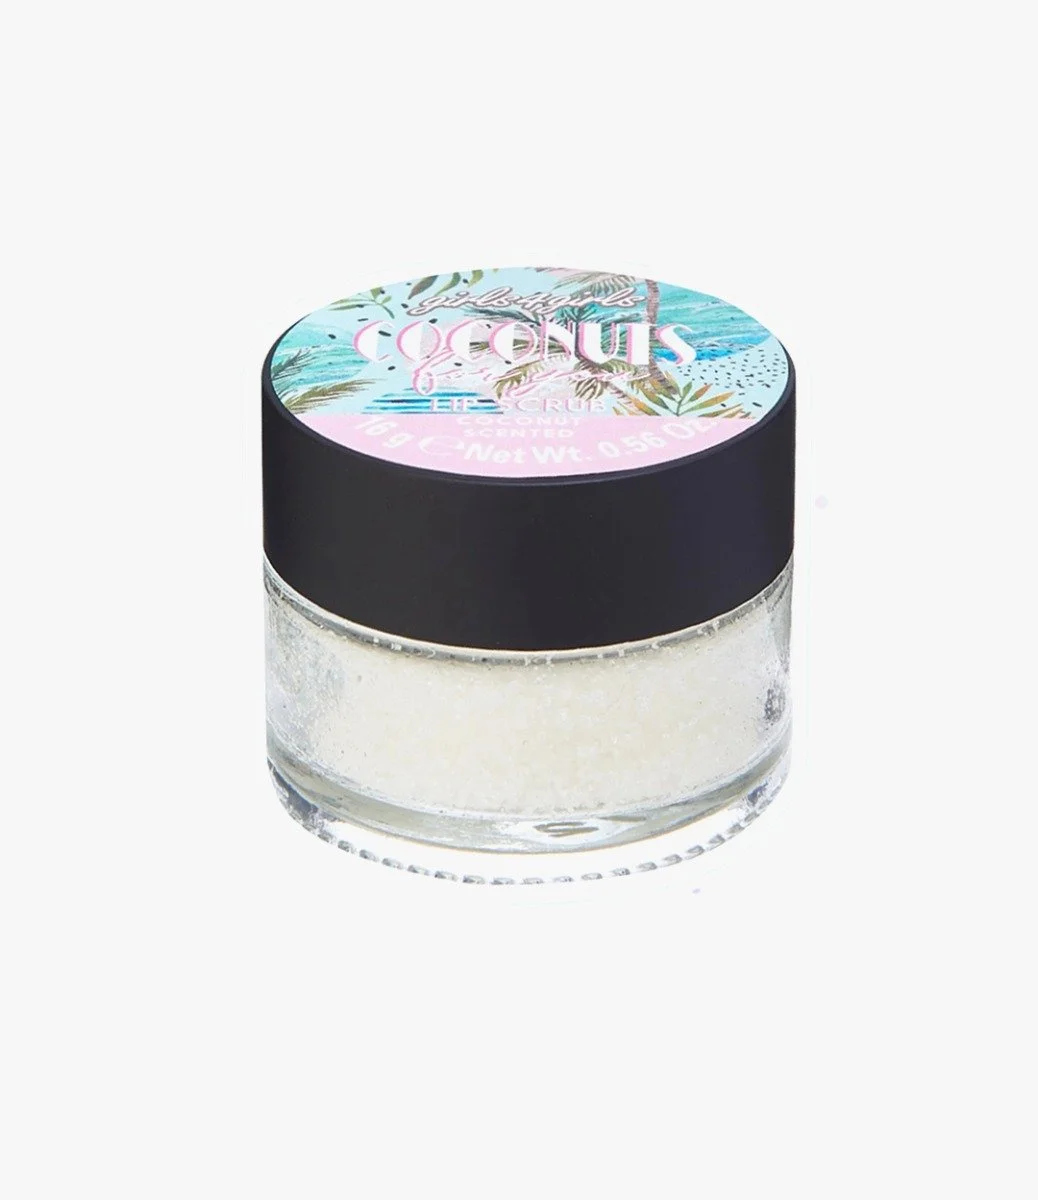 Lip Scrub - Coconuts for you 15g By Girls 4 Girls